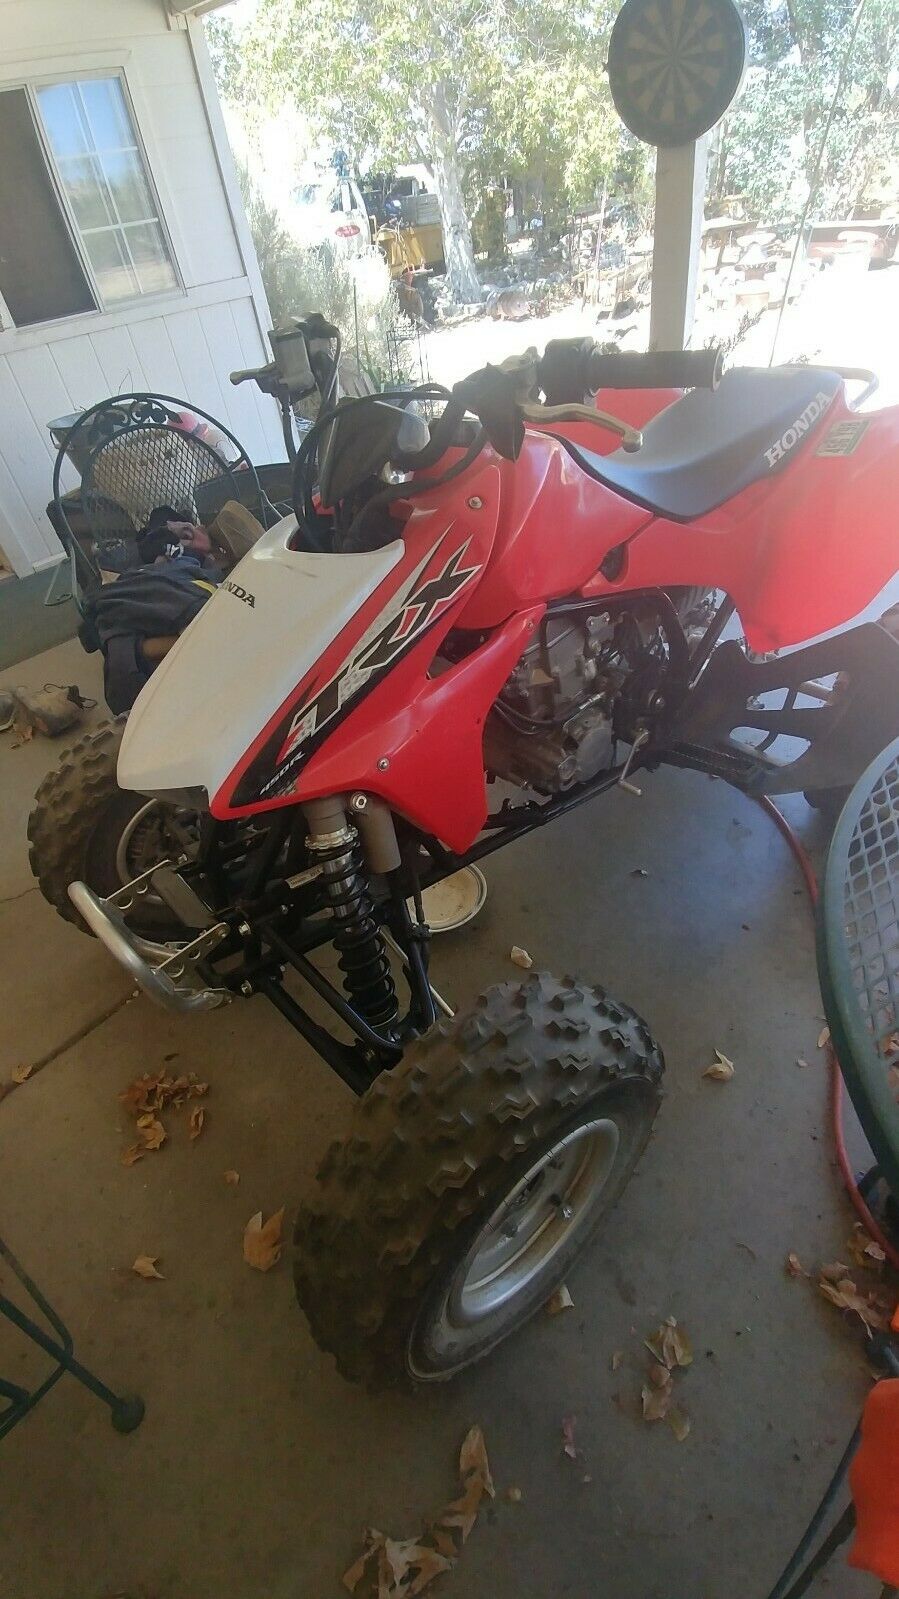 2017 Honda Trx 450r Quad Red/ With New Pipe. Like New Low Hours.